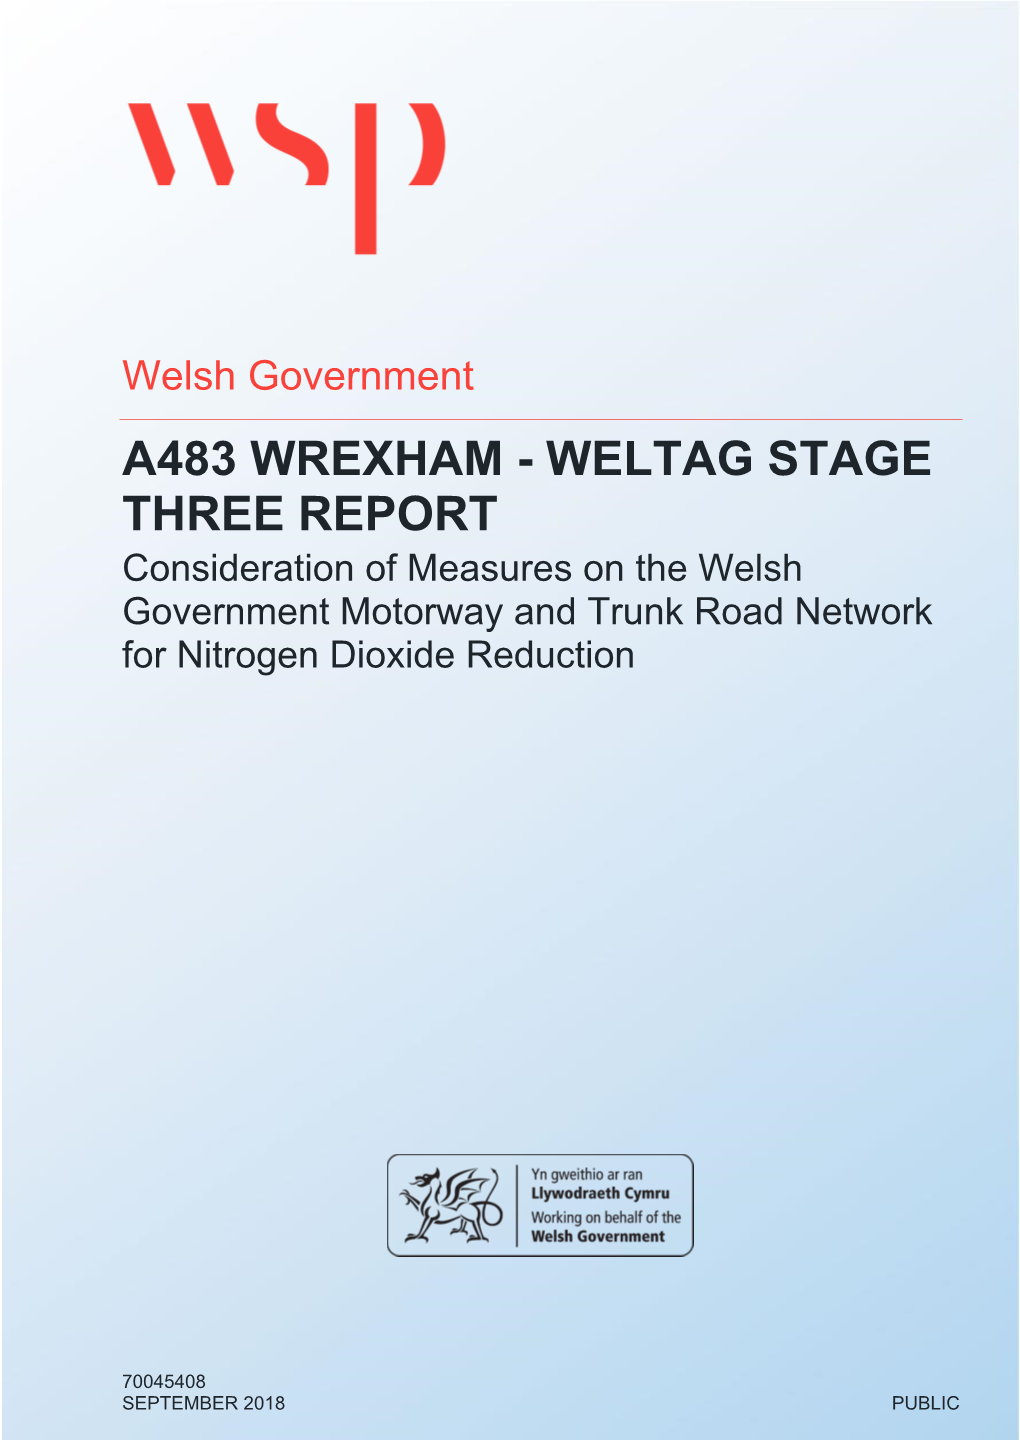 A483 WREXHAM - WELTAG STAGE THREE REPORT Consideration of Measures on the Welsh Government Motorway and Trunk Road Network for Nitrogen Dioxide Reduction